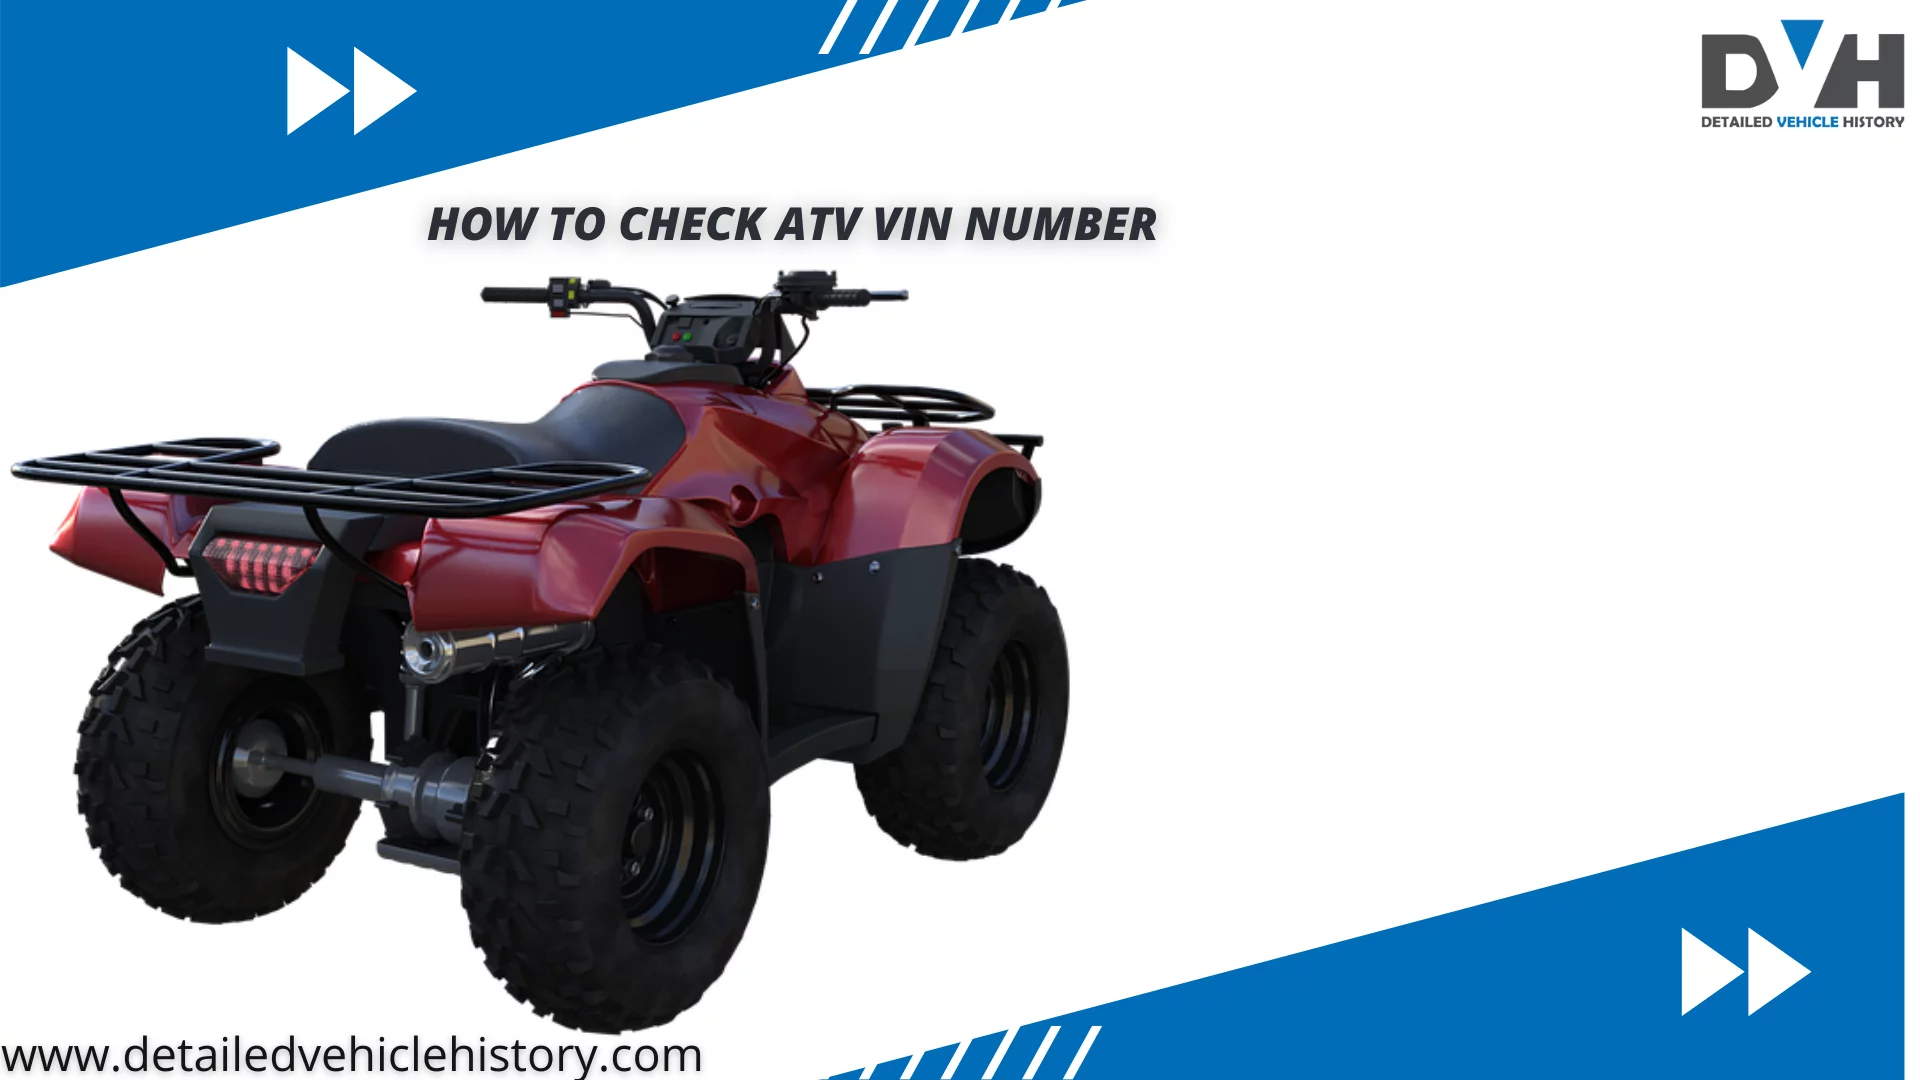 How to Check ATV VIN Number